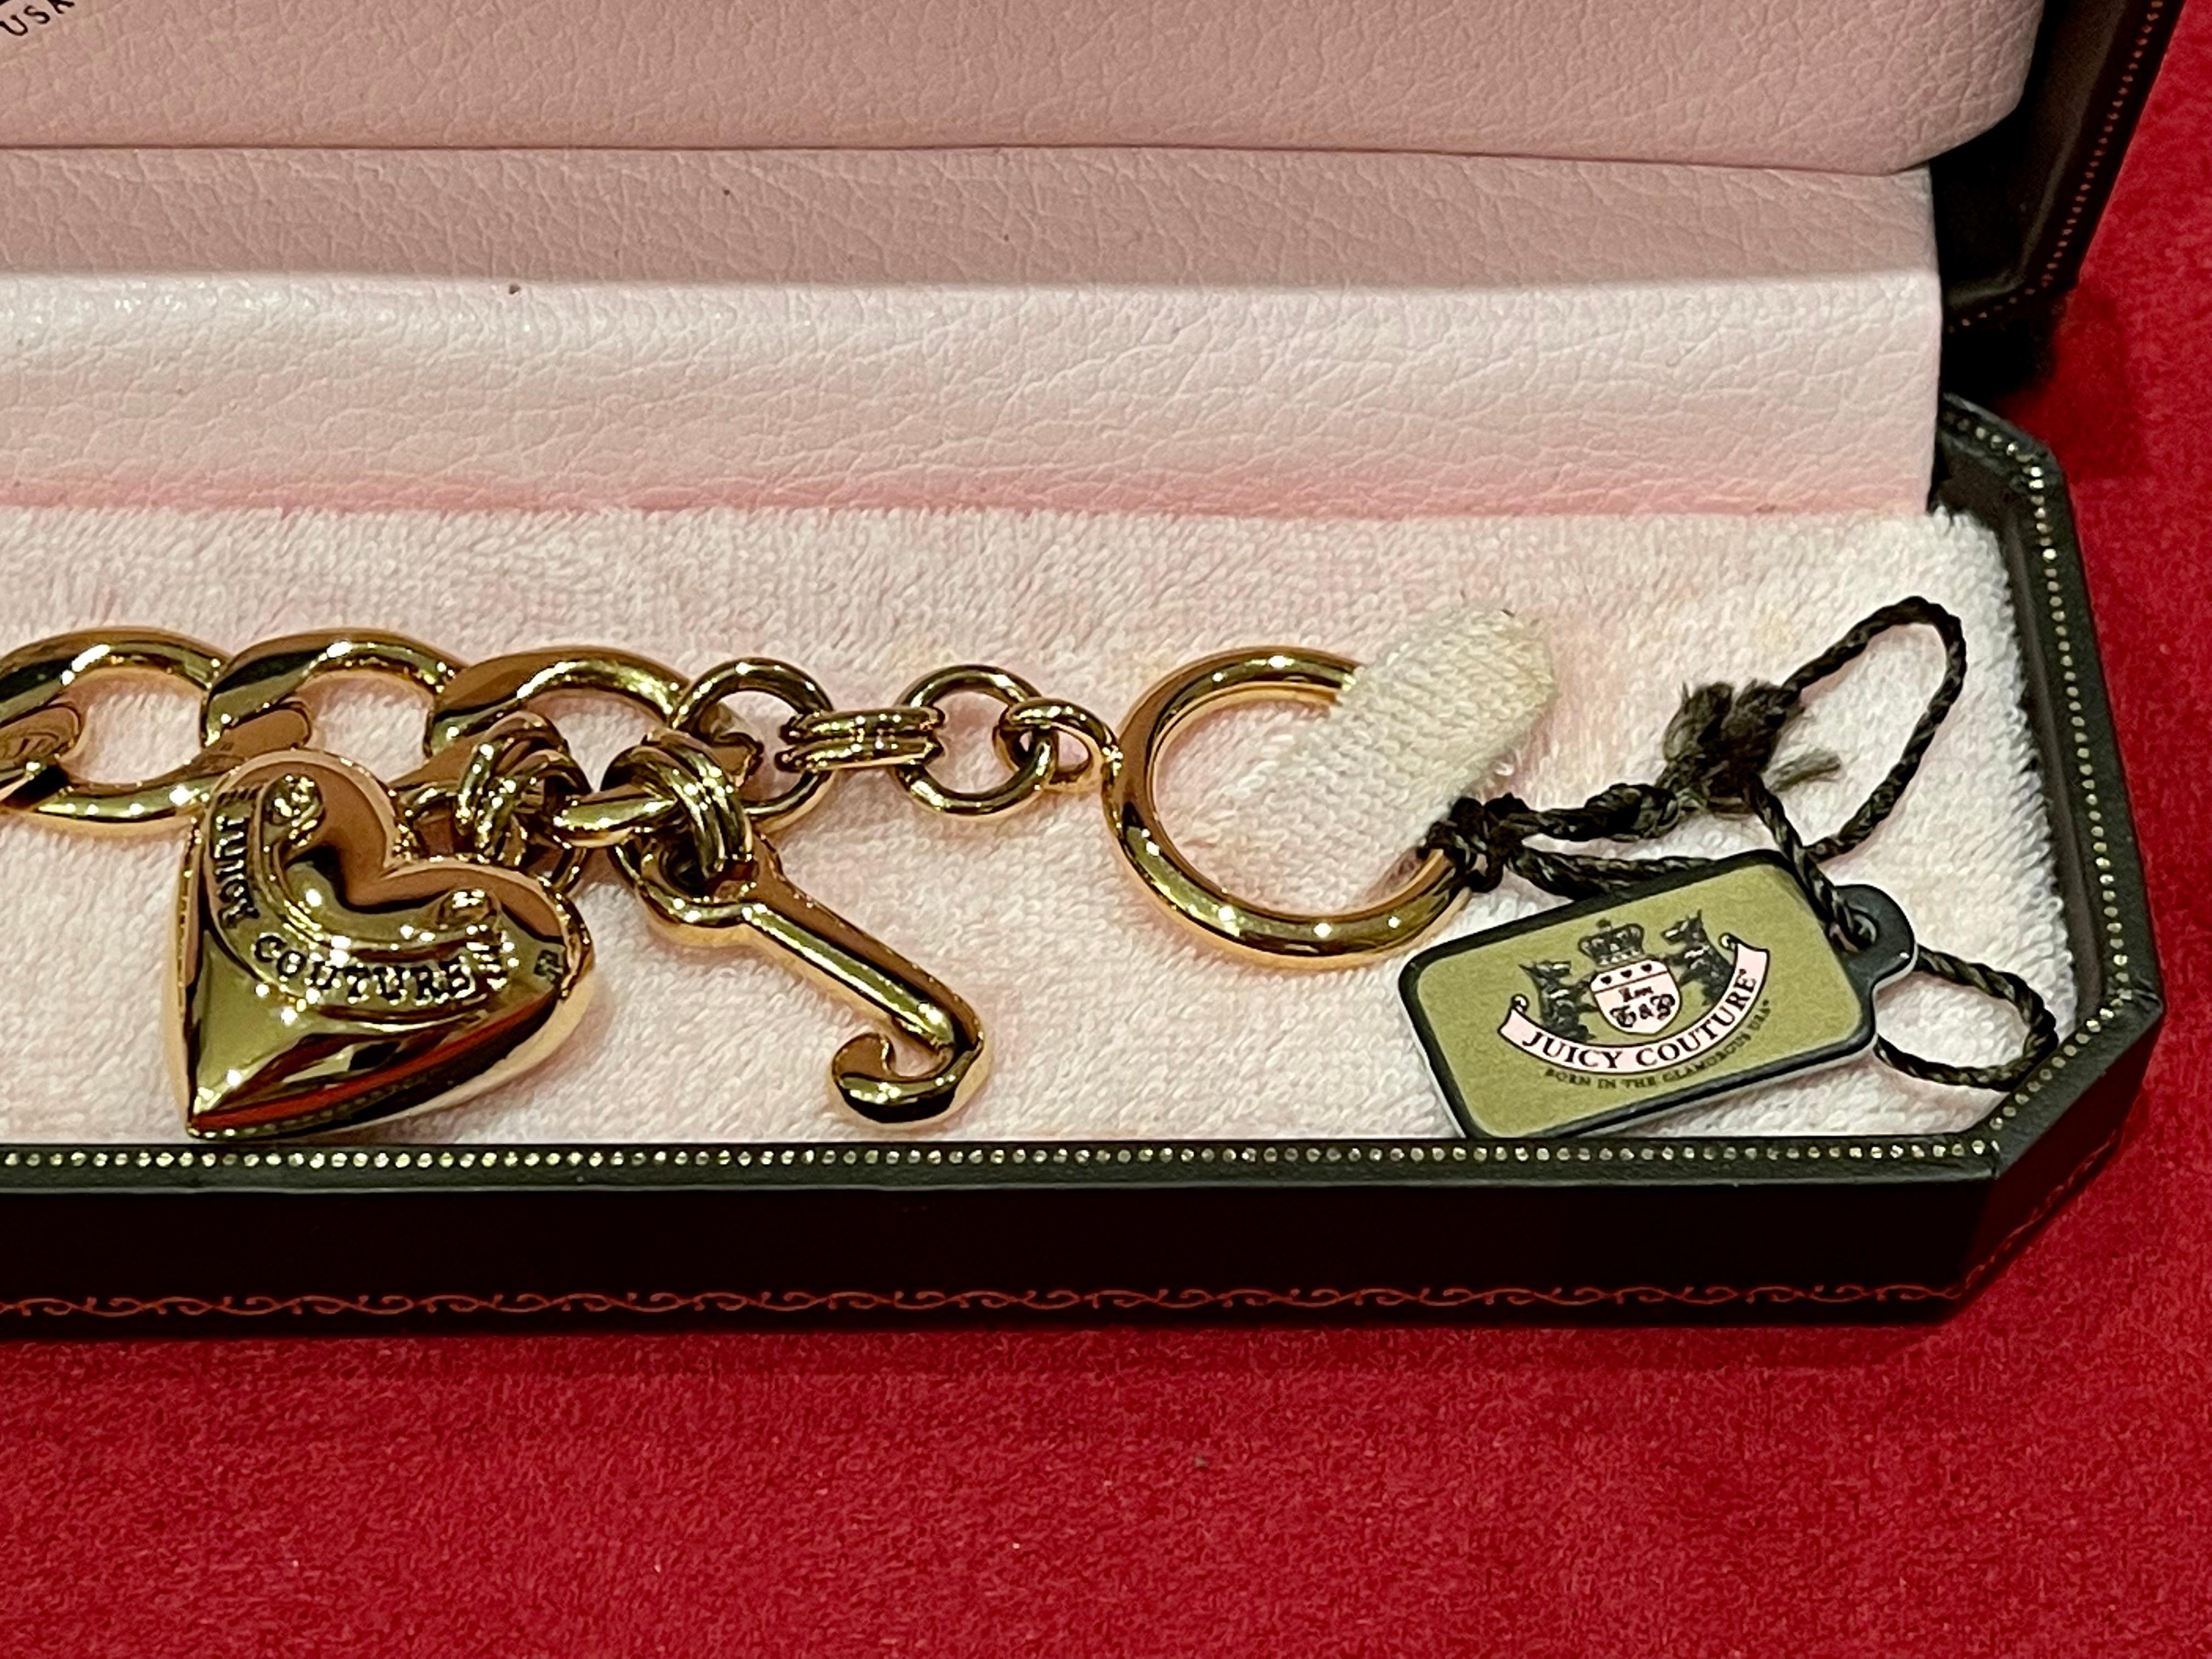 JUICY COUTURE bracelet in gold metal with two hooked charms, a 